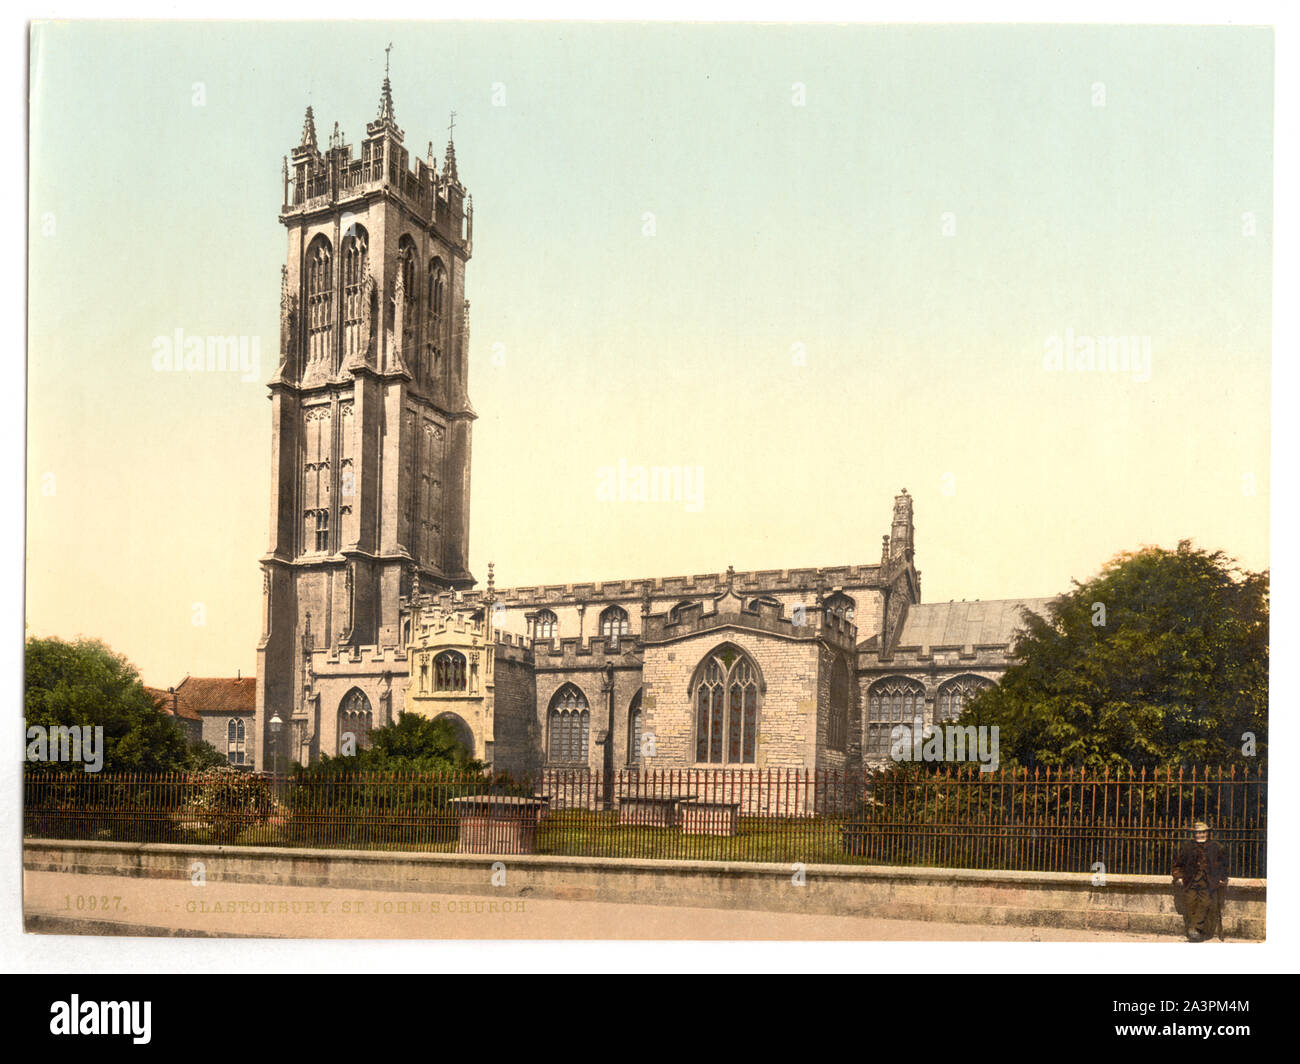 St. John's Church, Glastonbury, England Forms part of: Views of the British Isles, in the Photochrom print collection. Stock Photo